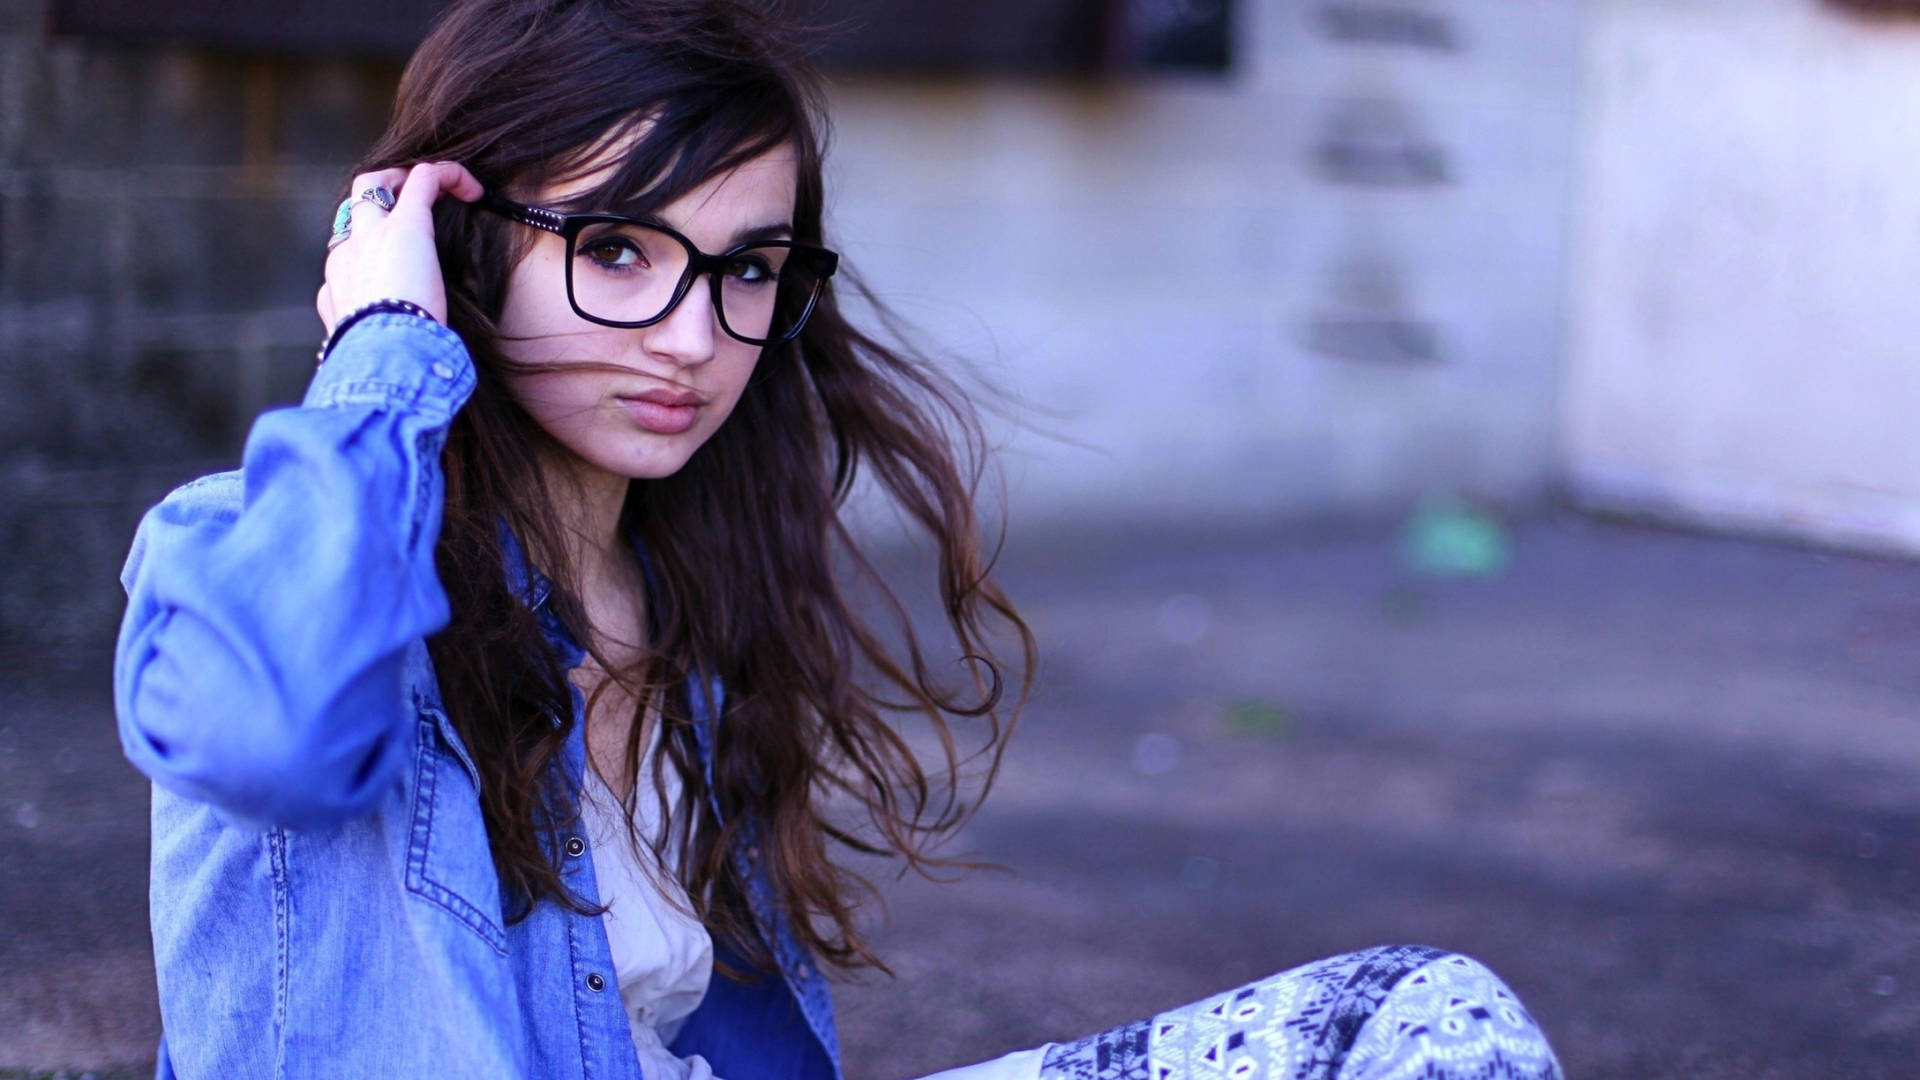 Cute Women With Glasses Moriah Pereira Picture